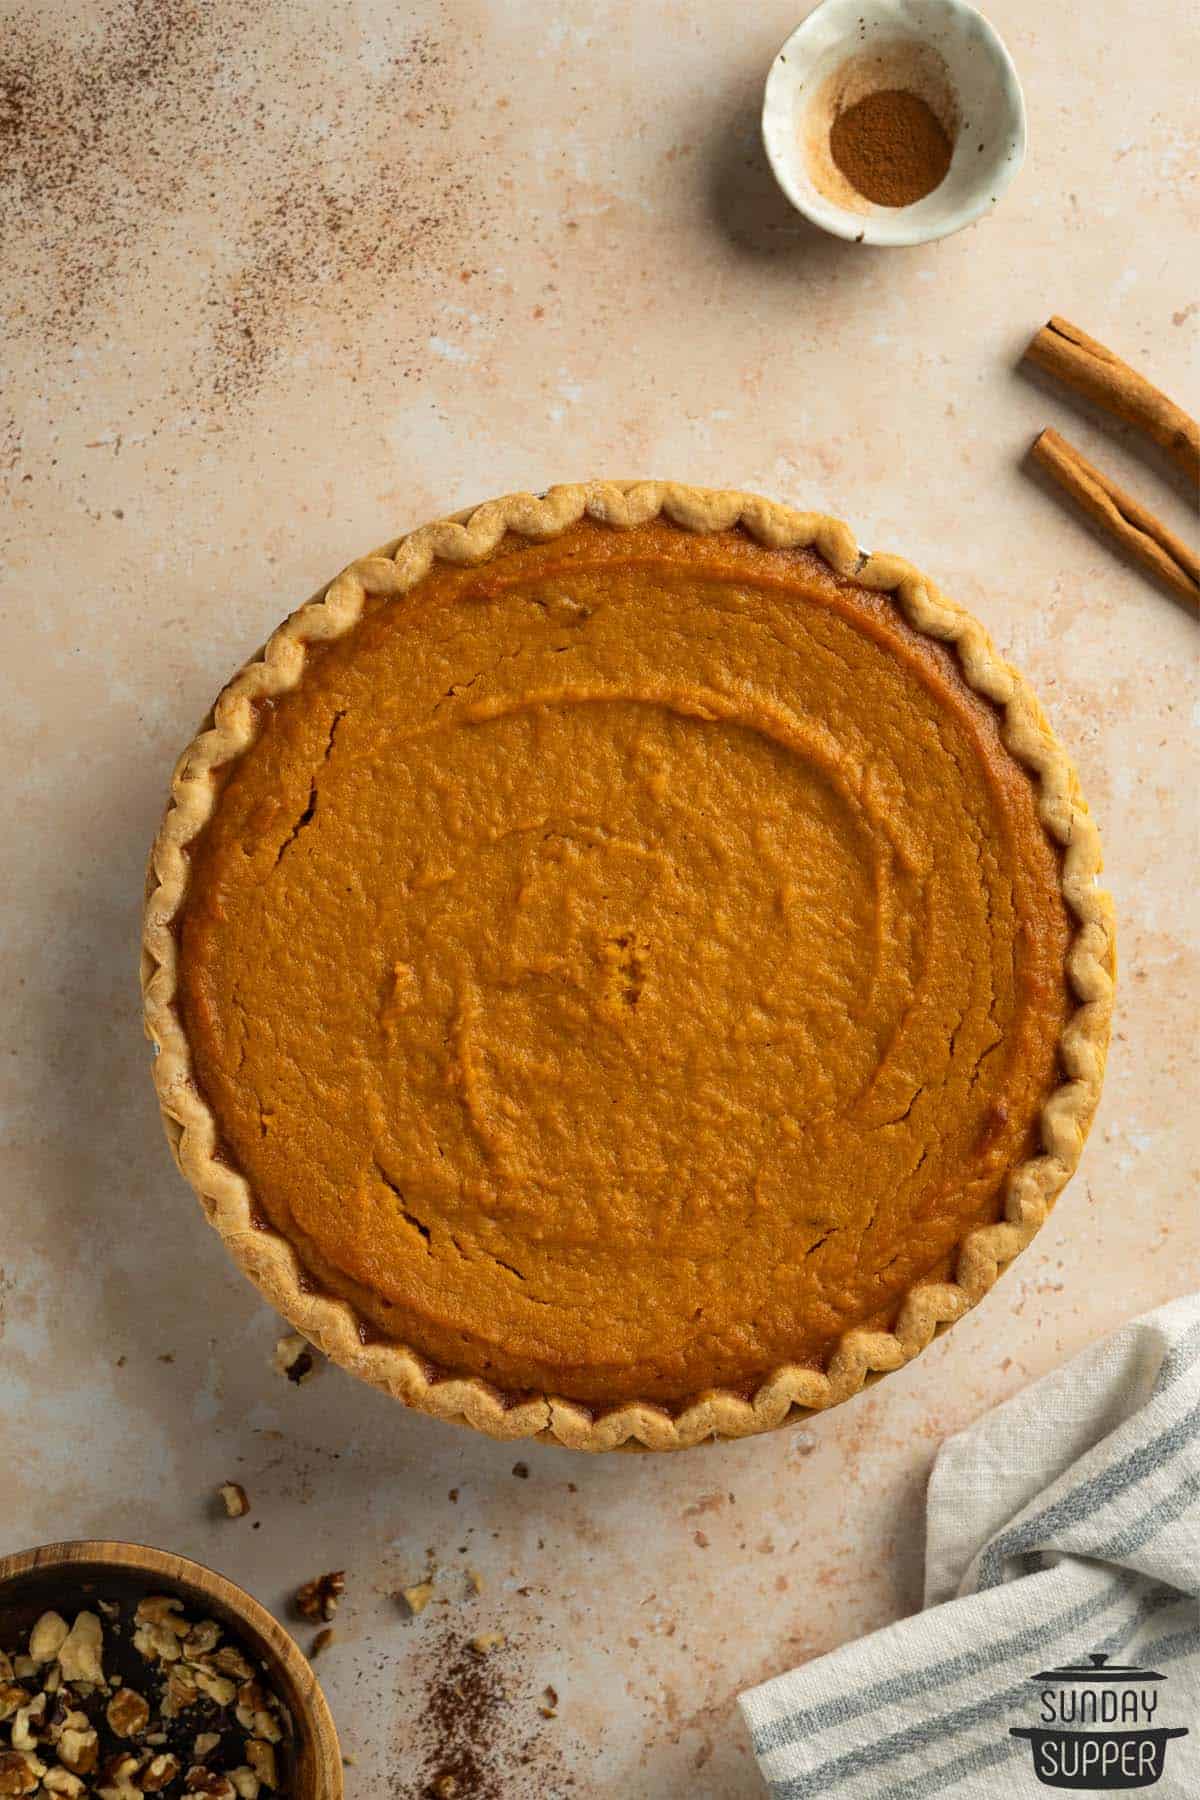 a fully baked sweet potato pie with extra cinnamon